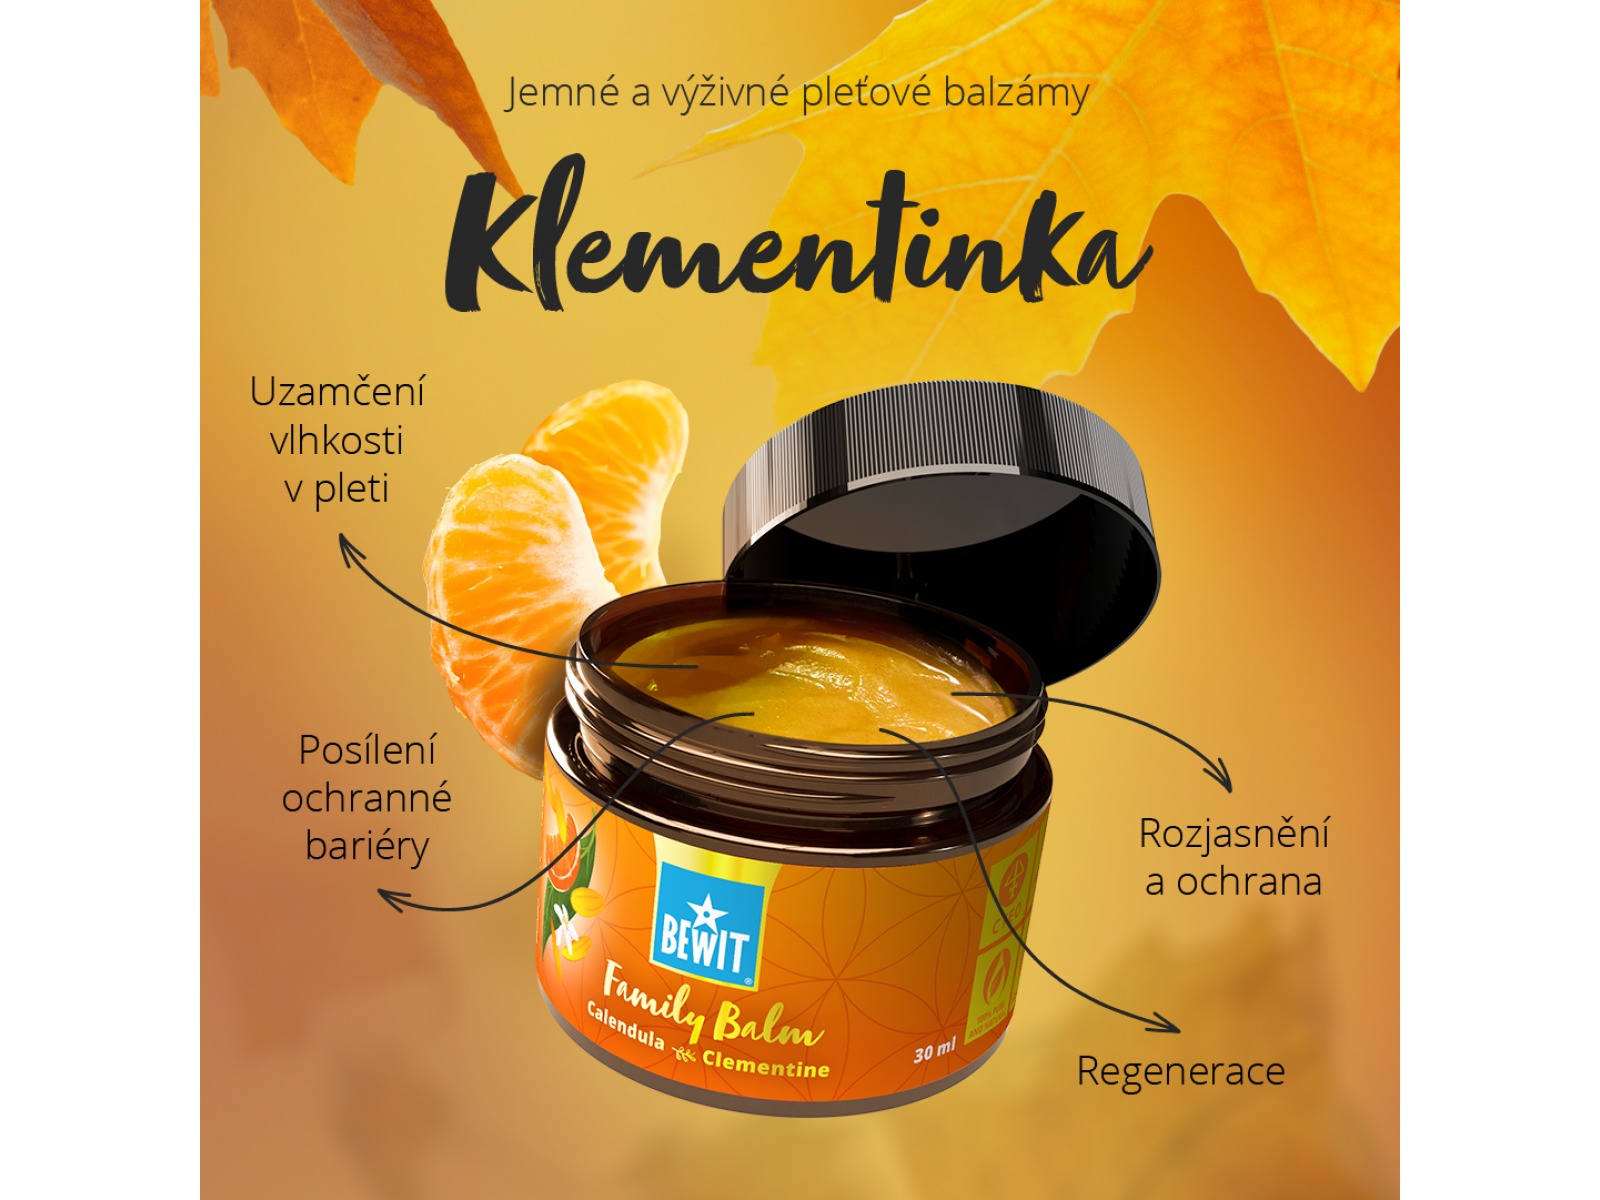 BEWIT FAMILY BALM CALENDULA AND CLEMENTINE - CARING BALM FOR THE WHOLE FAMILY - 7